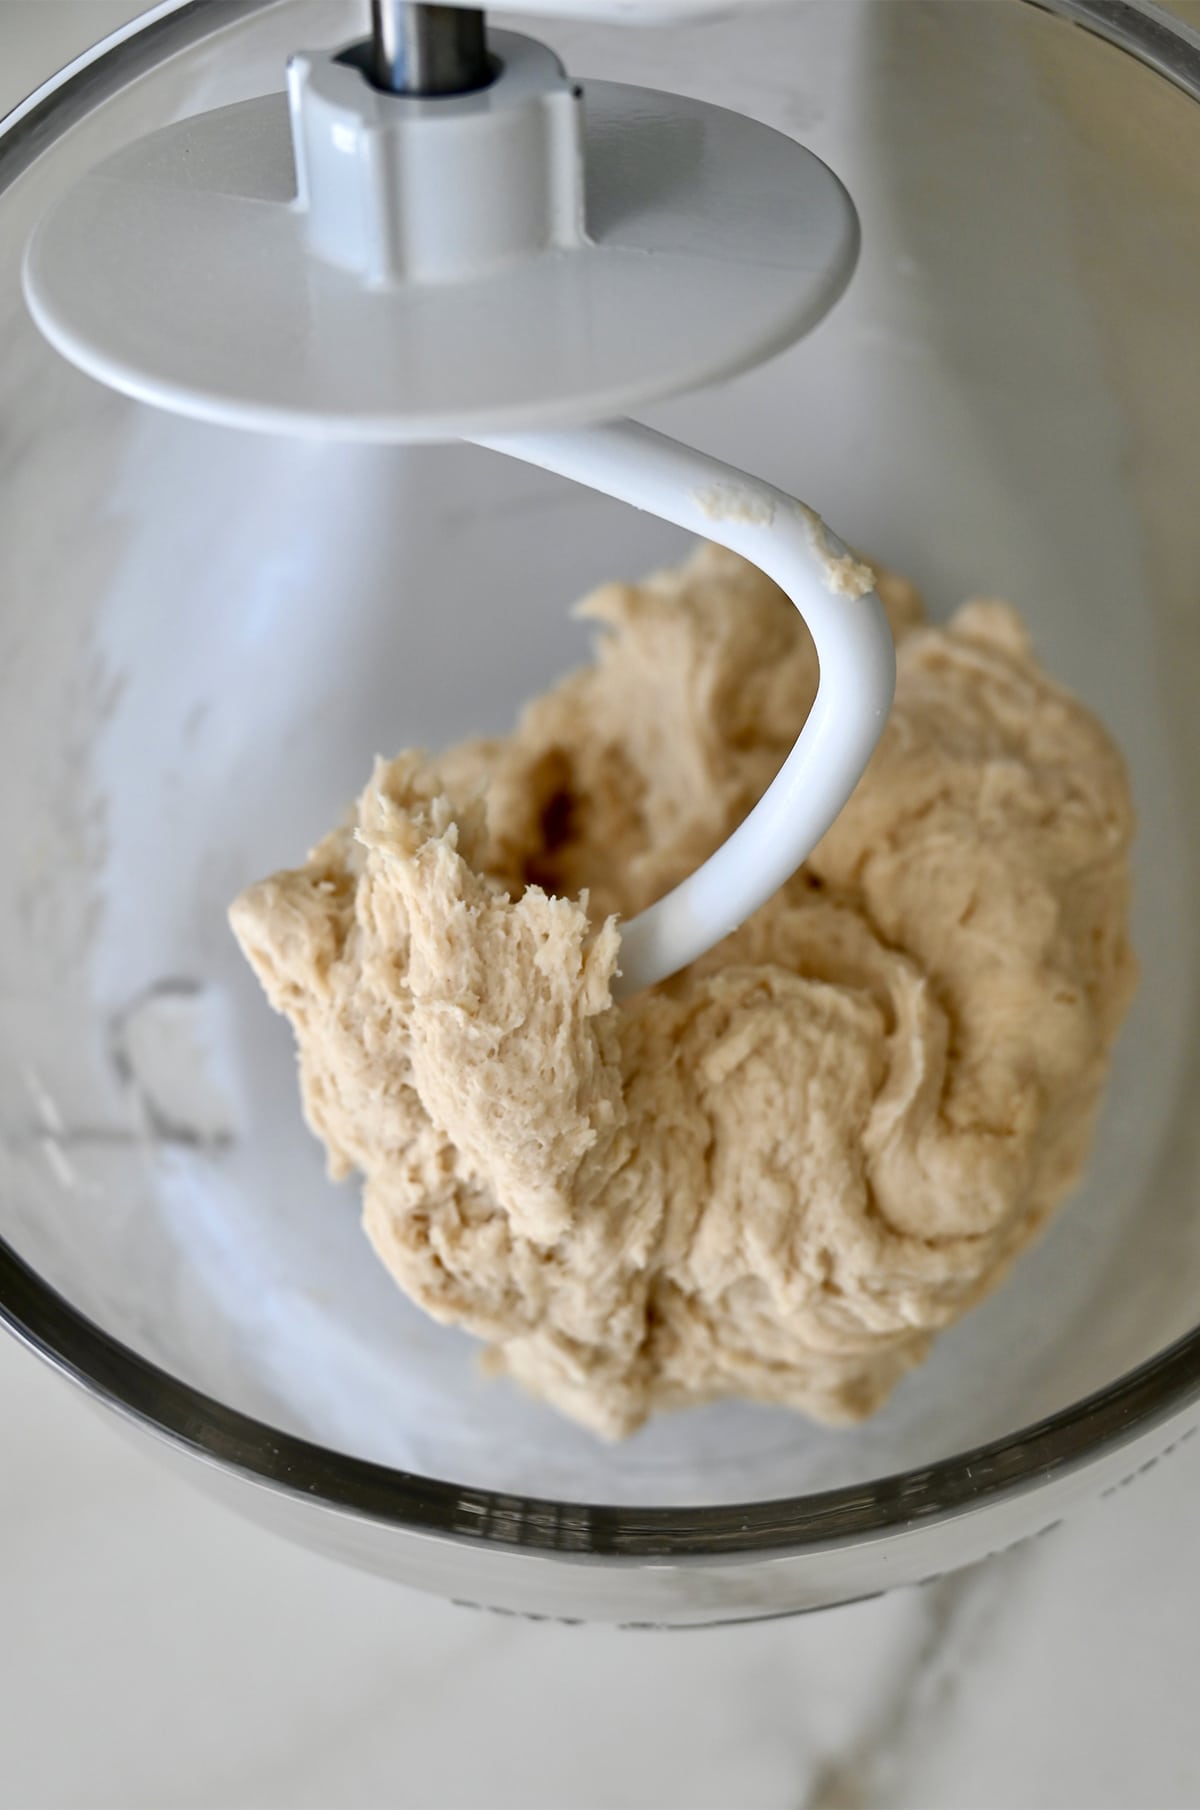 Pretzel dough wrapped around the dough hook of a white stand mixer with a glass bowl.